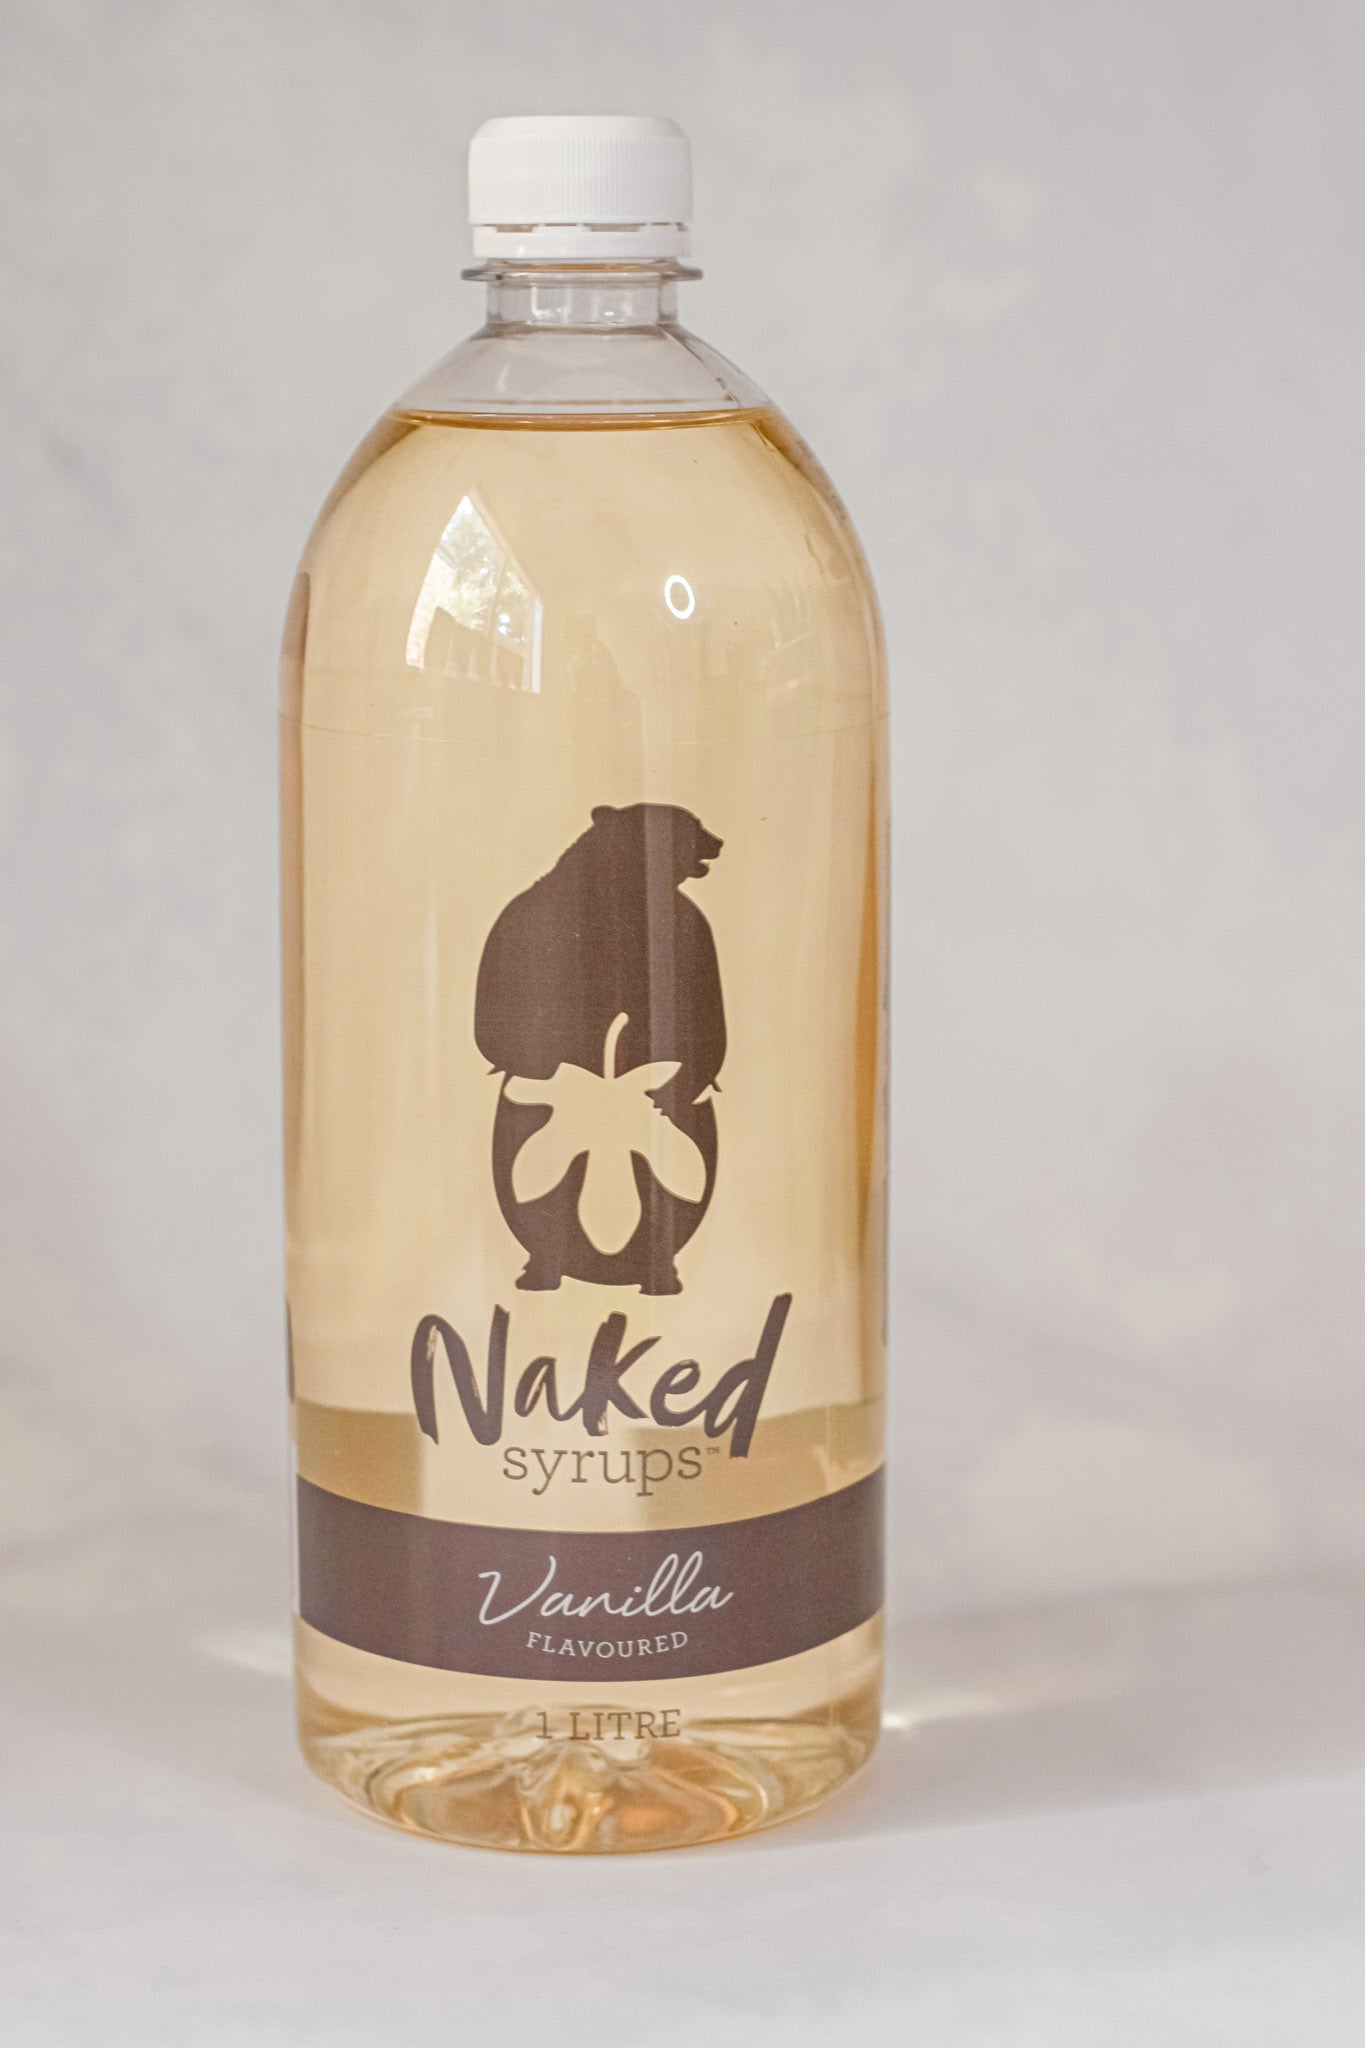 Naked Syrups 1 litre